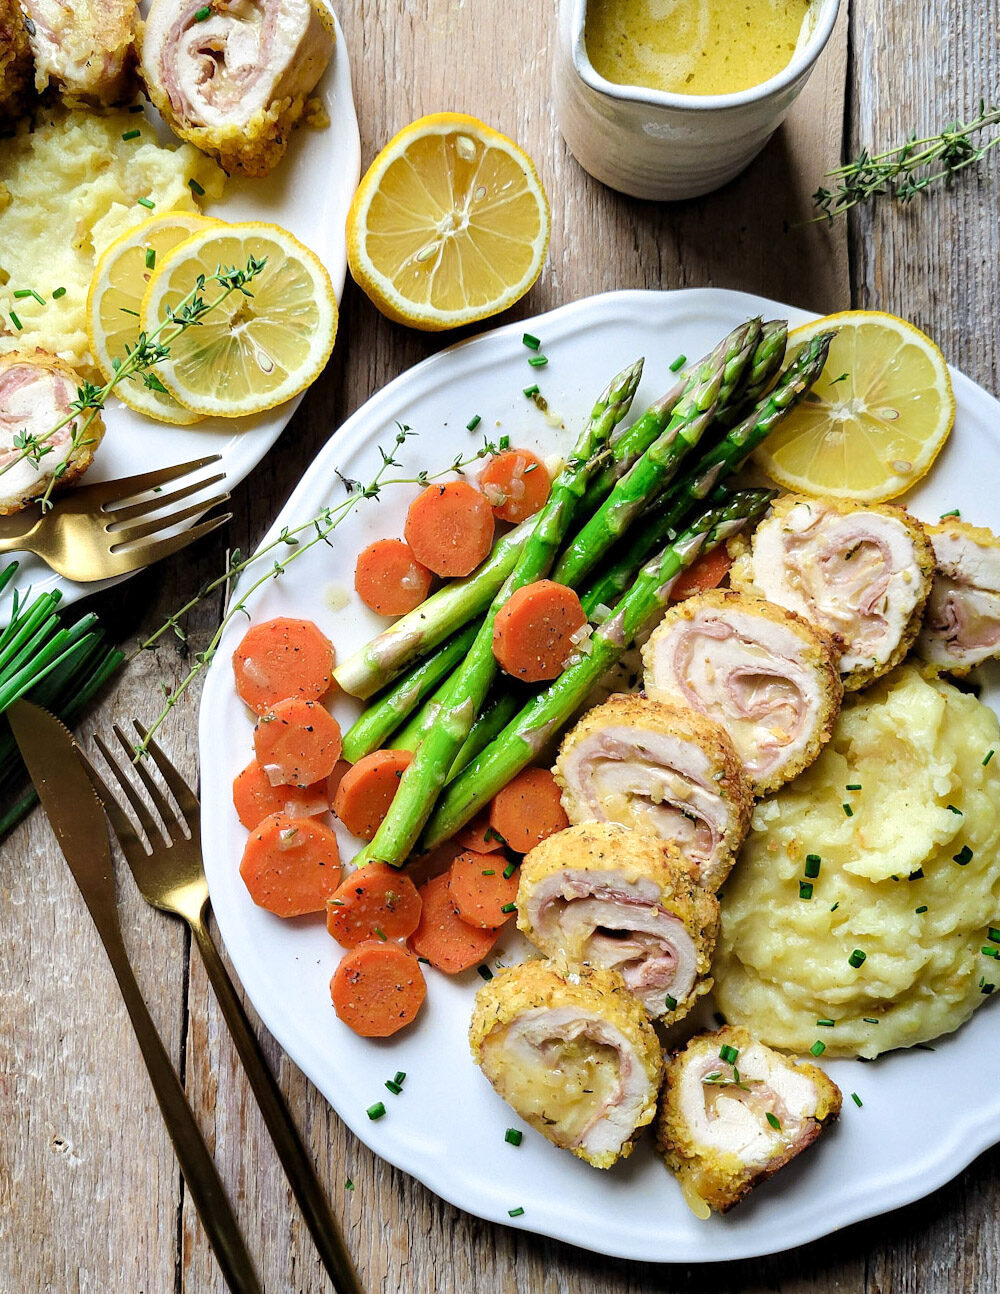 Two plates with Chicken Cordon Bleu sliced and served with mashed potatoes, asparagus and carrots. A container of lemon butter sauce is to the side.